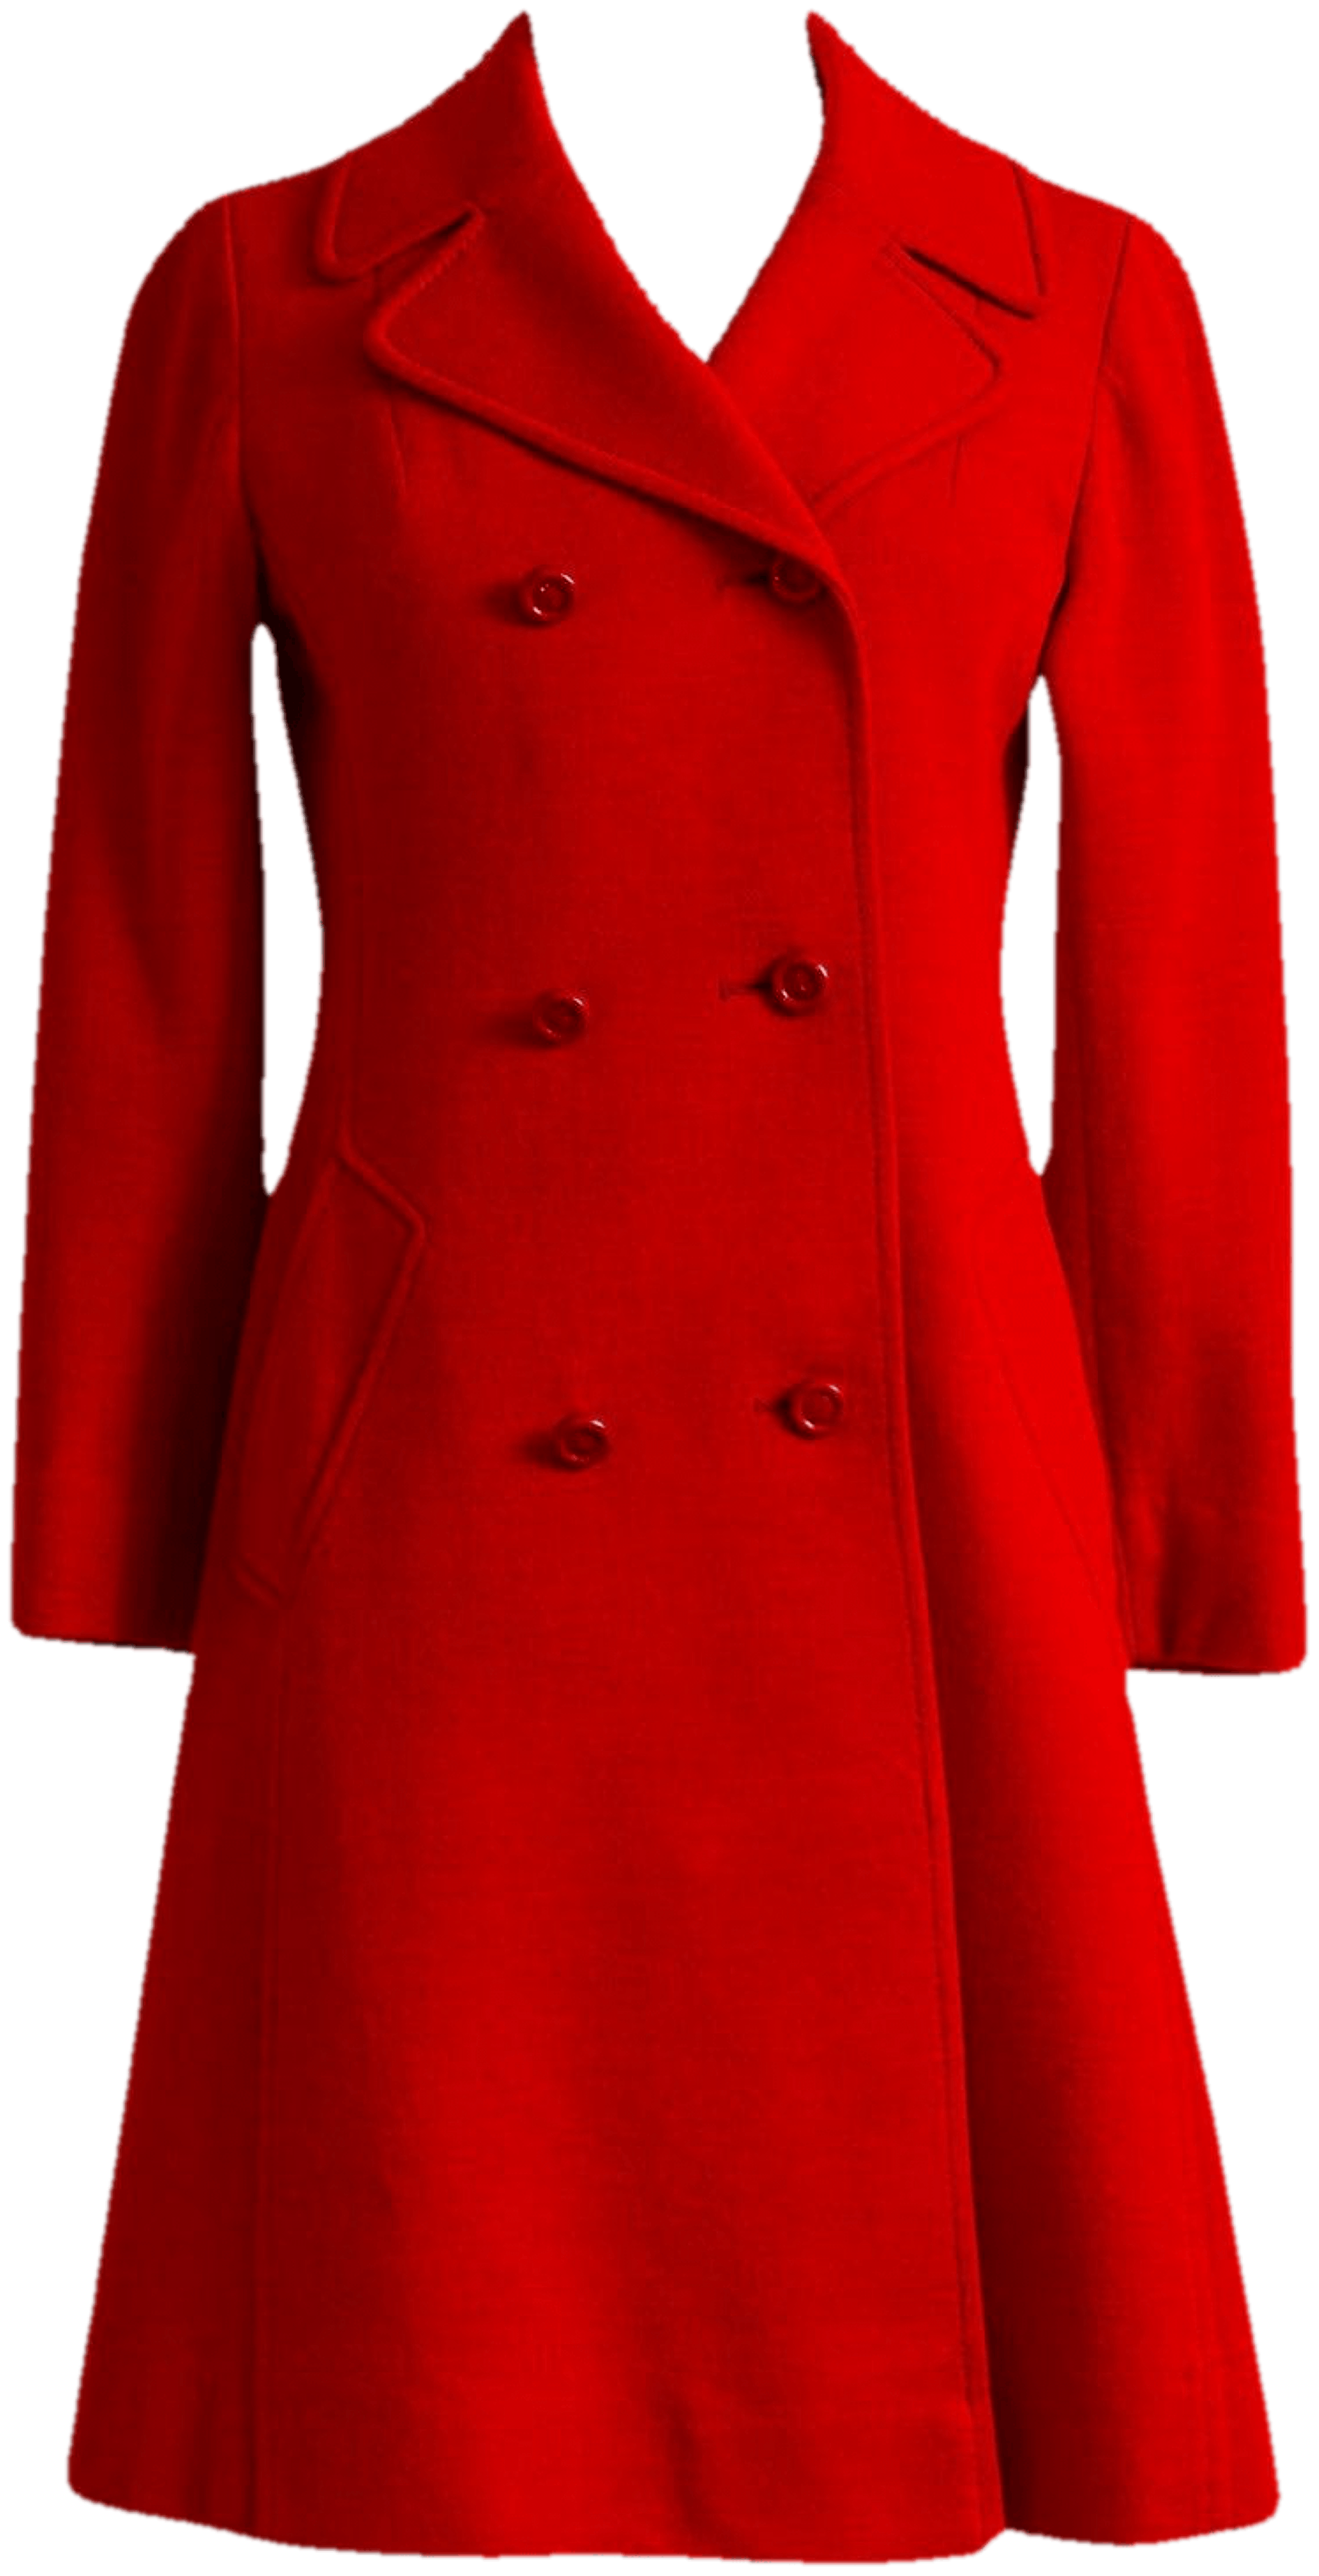 Vintage 60's A-Line Red Jersey Wool Coat by Tabe Adaptation | Shop ...